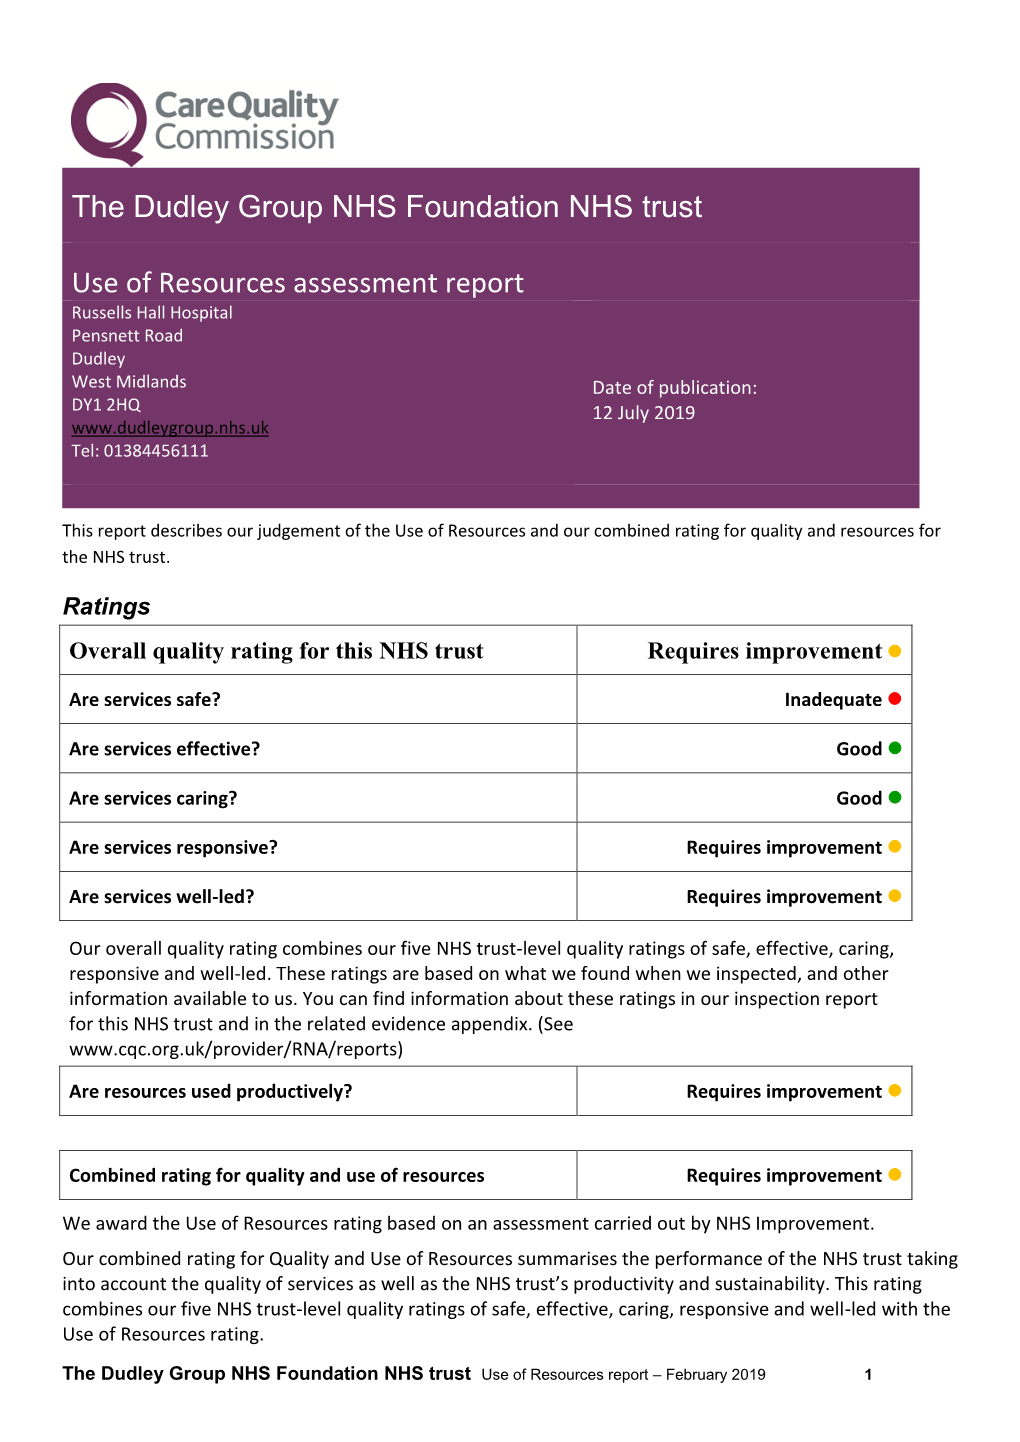 The Dudley Group NHS Foundation NHS Trust Use of Resources Assessment Report